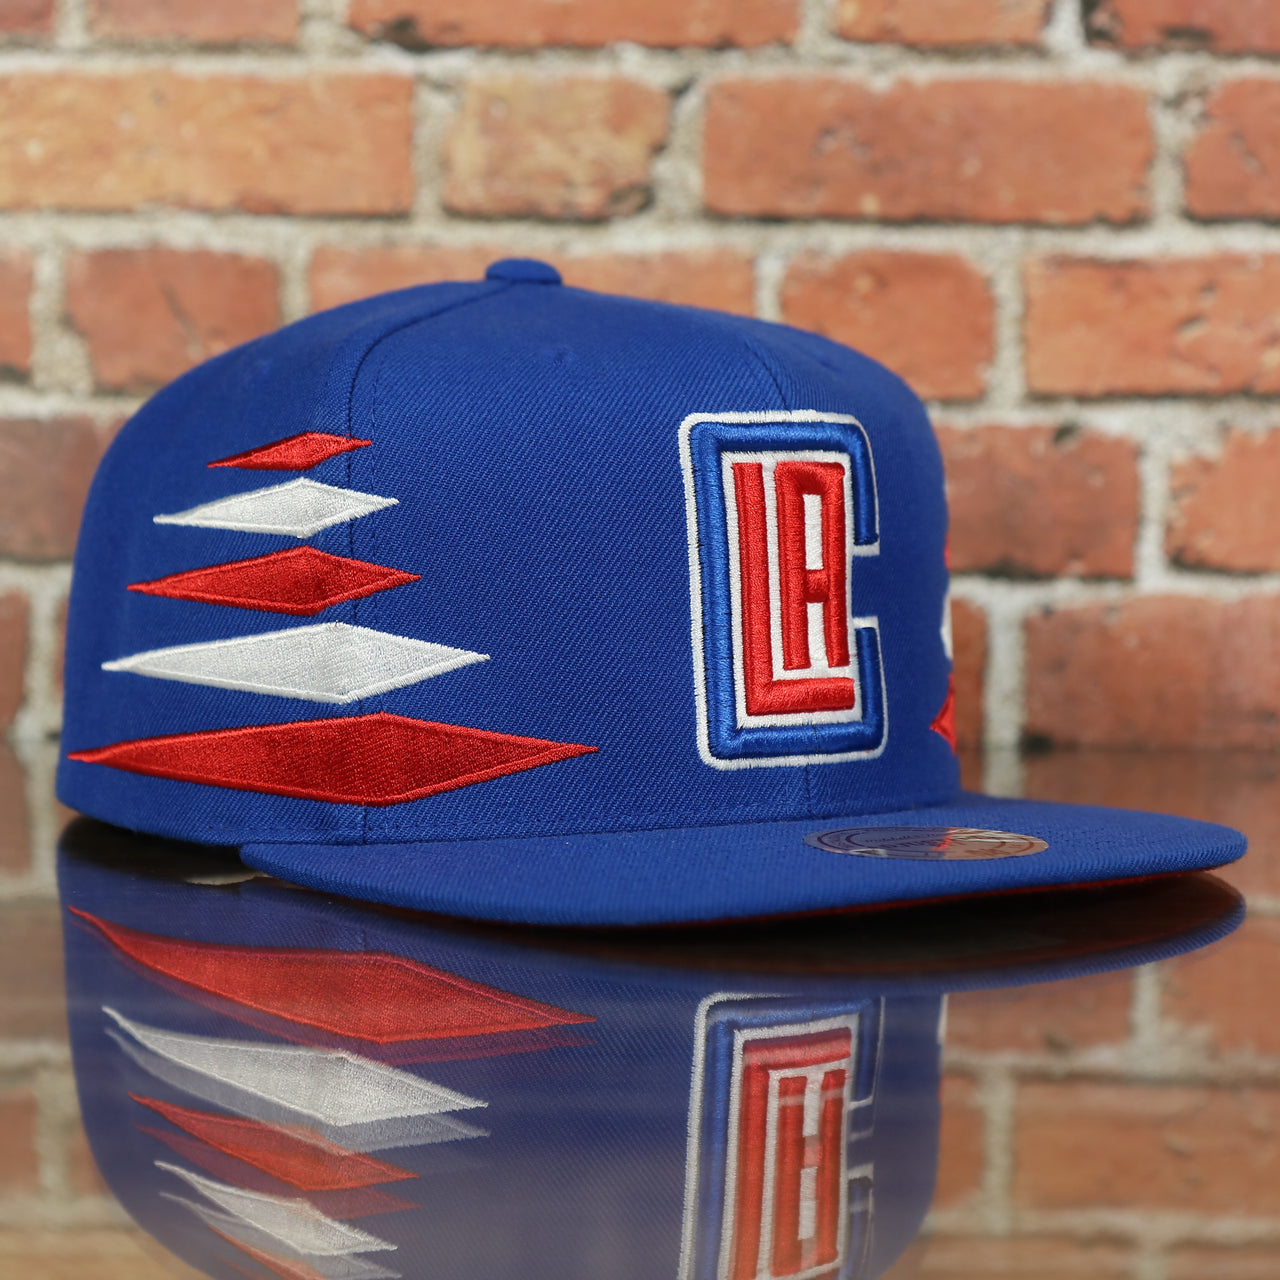 Los Angeles Clippers Diamond Spikes Blue Snapback Hat